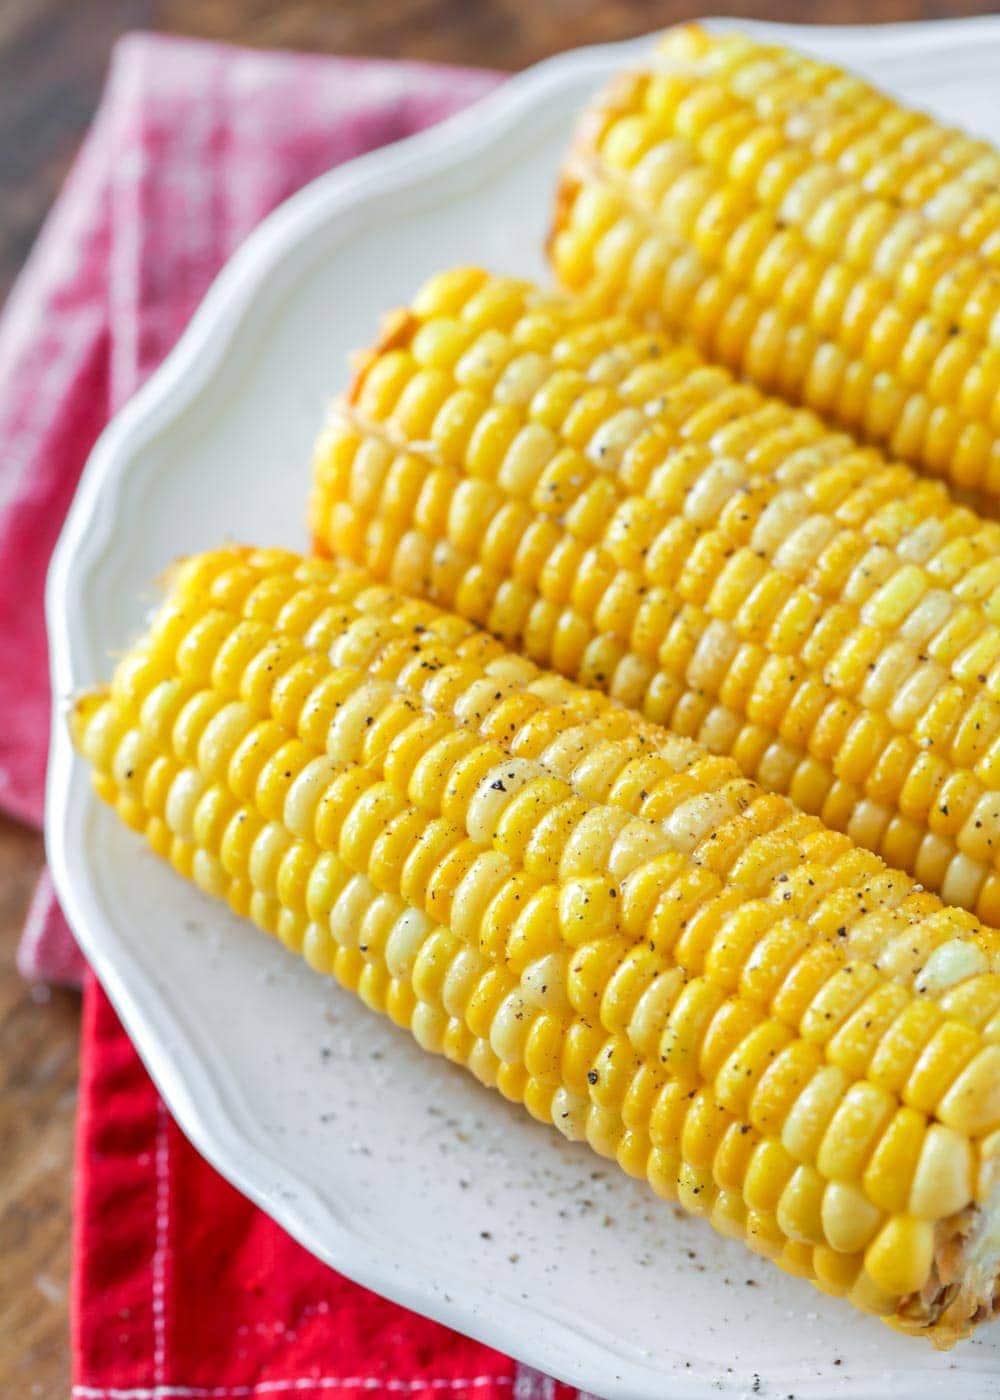 Boiled corn on the cob sitting on a white plate